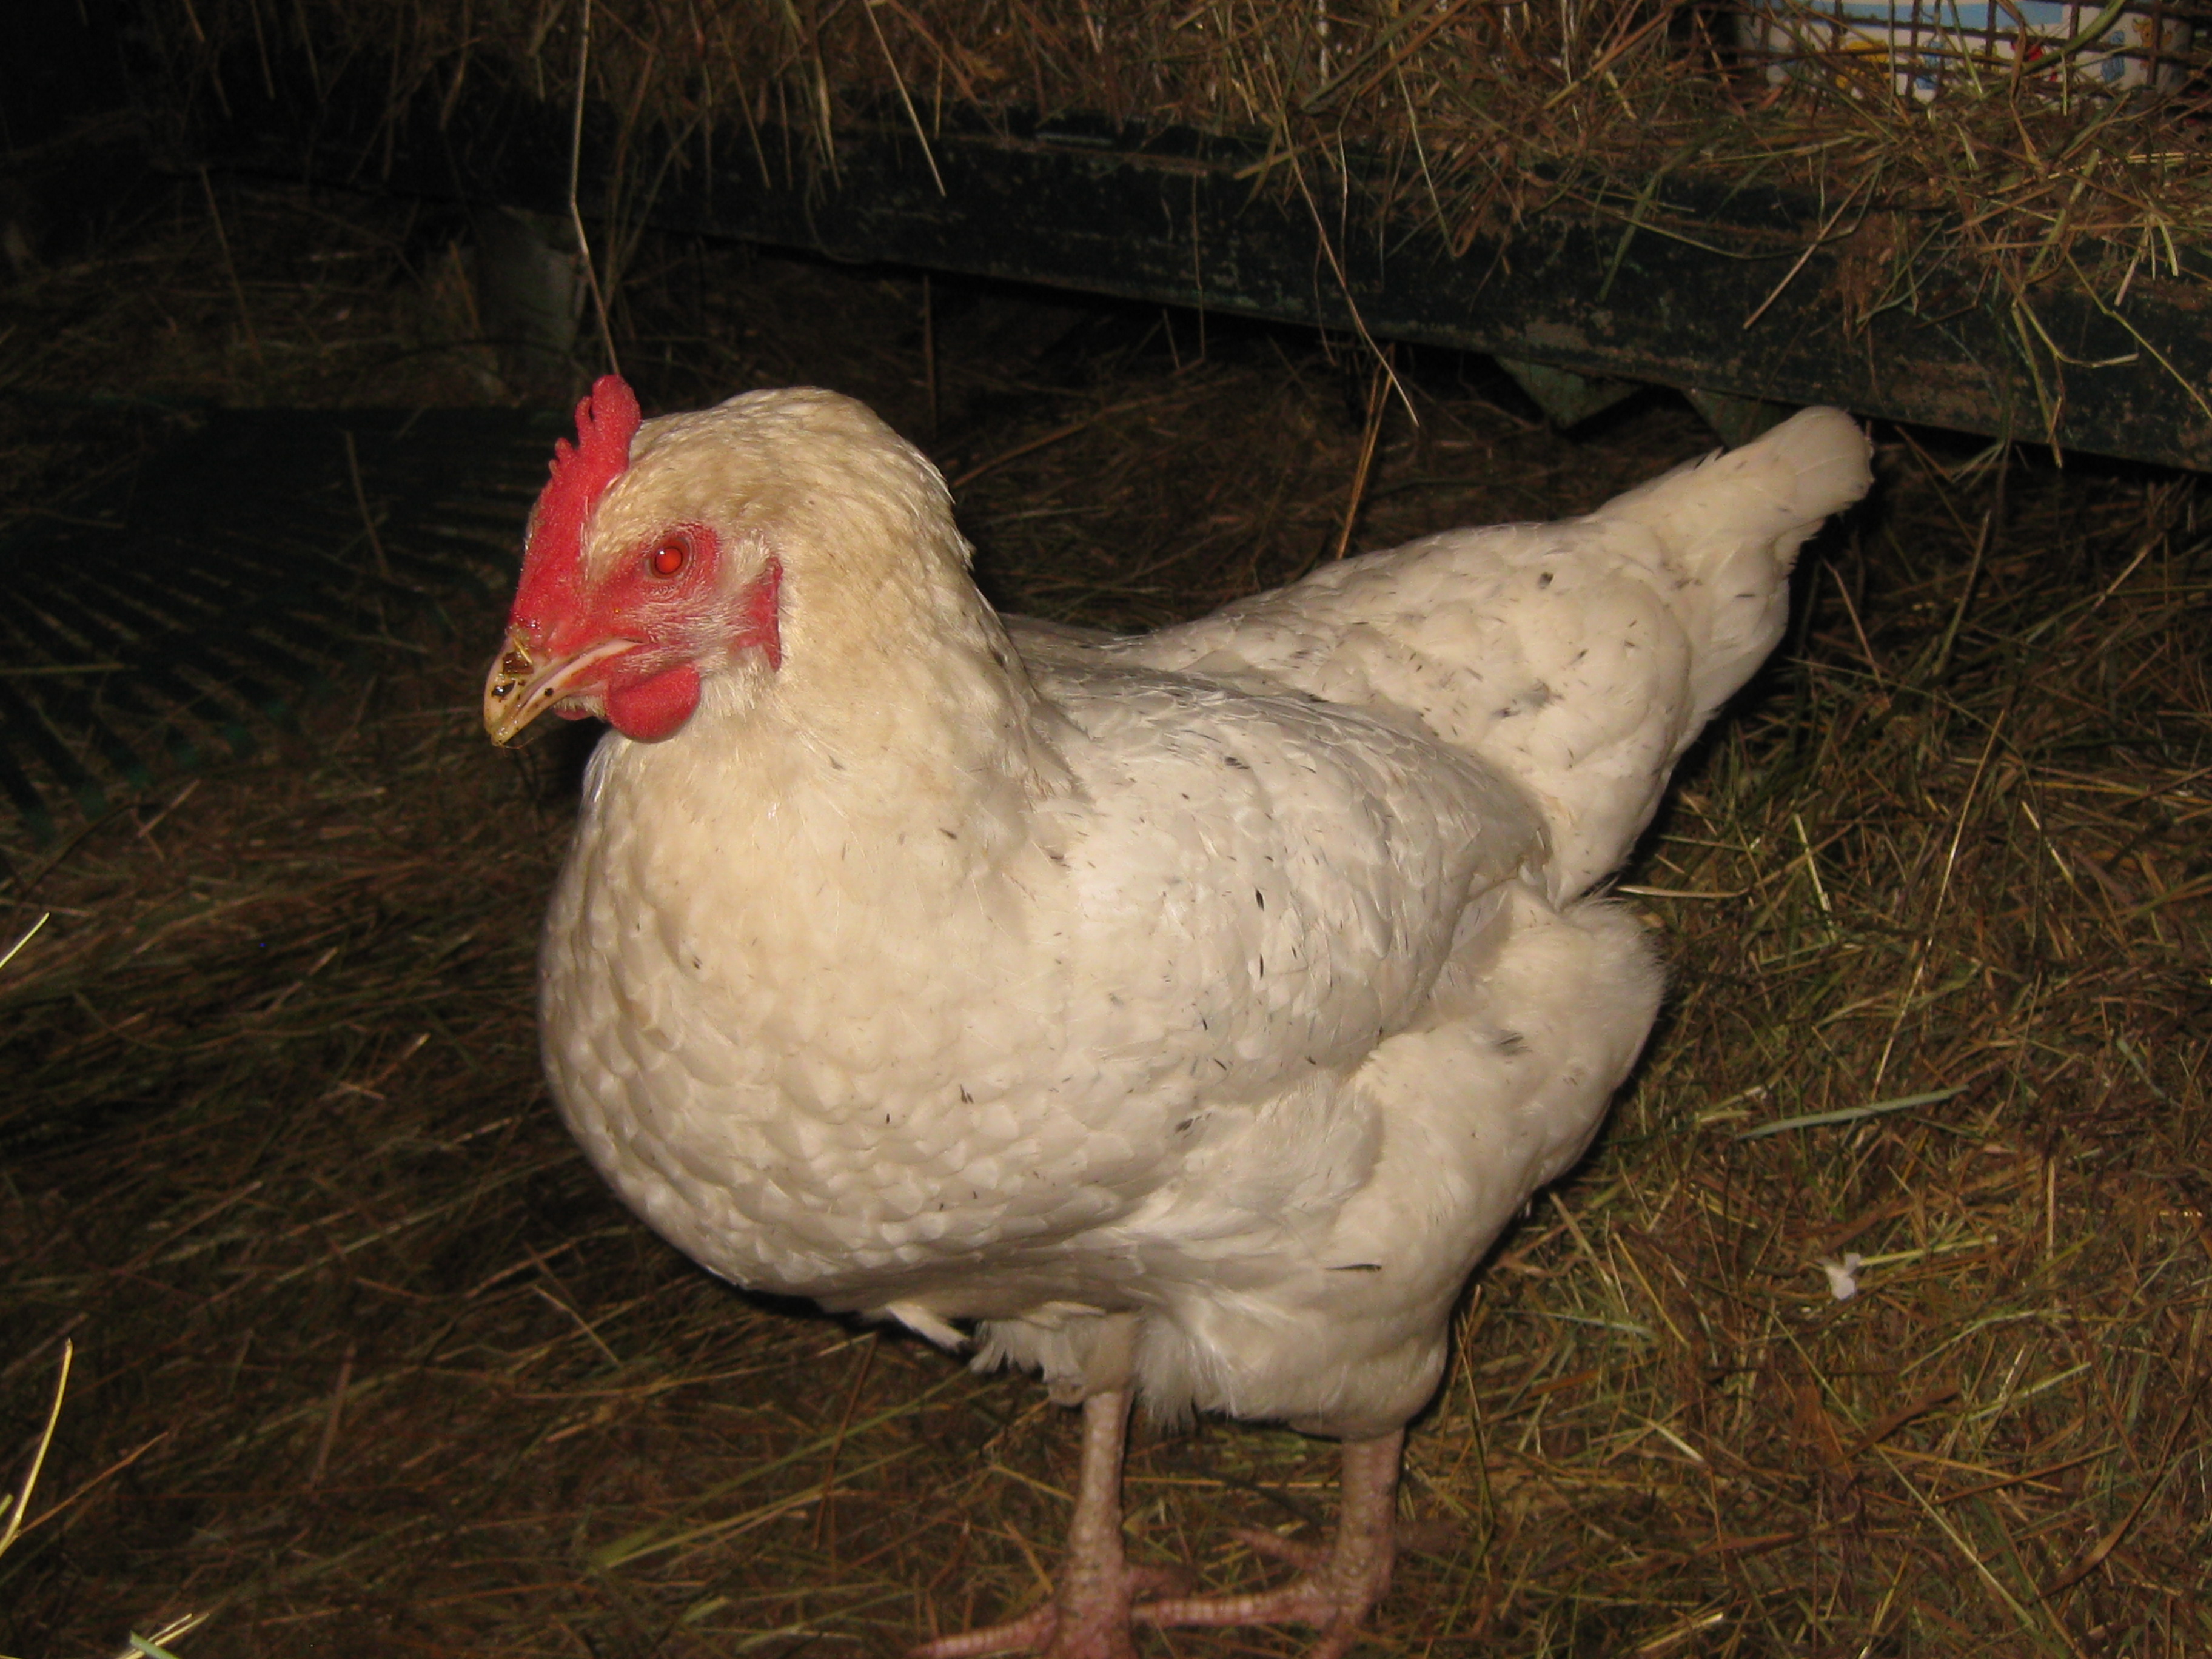 T^his is "Pepper". I don't know her breed,but she lays light bronze colored eggs! She has little black speckles on her back.